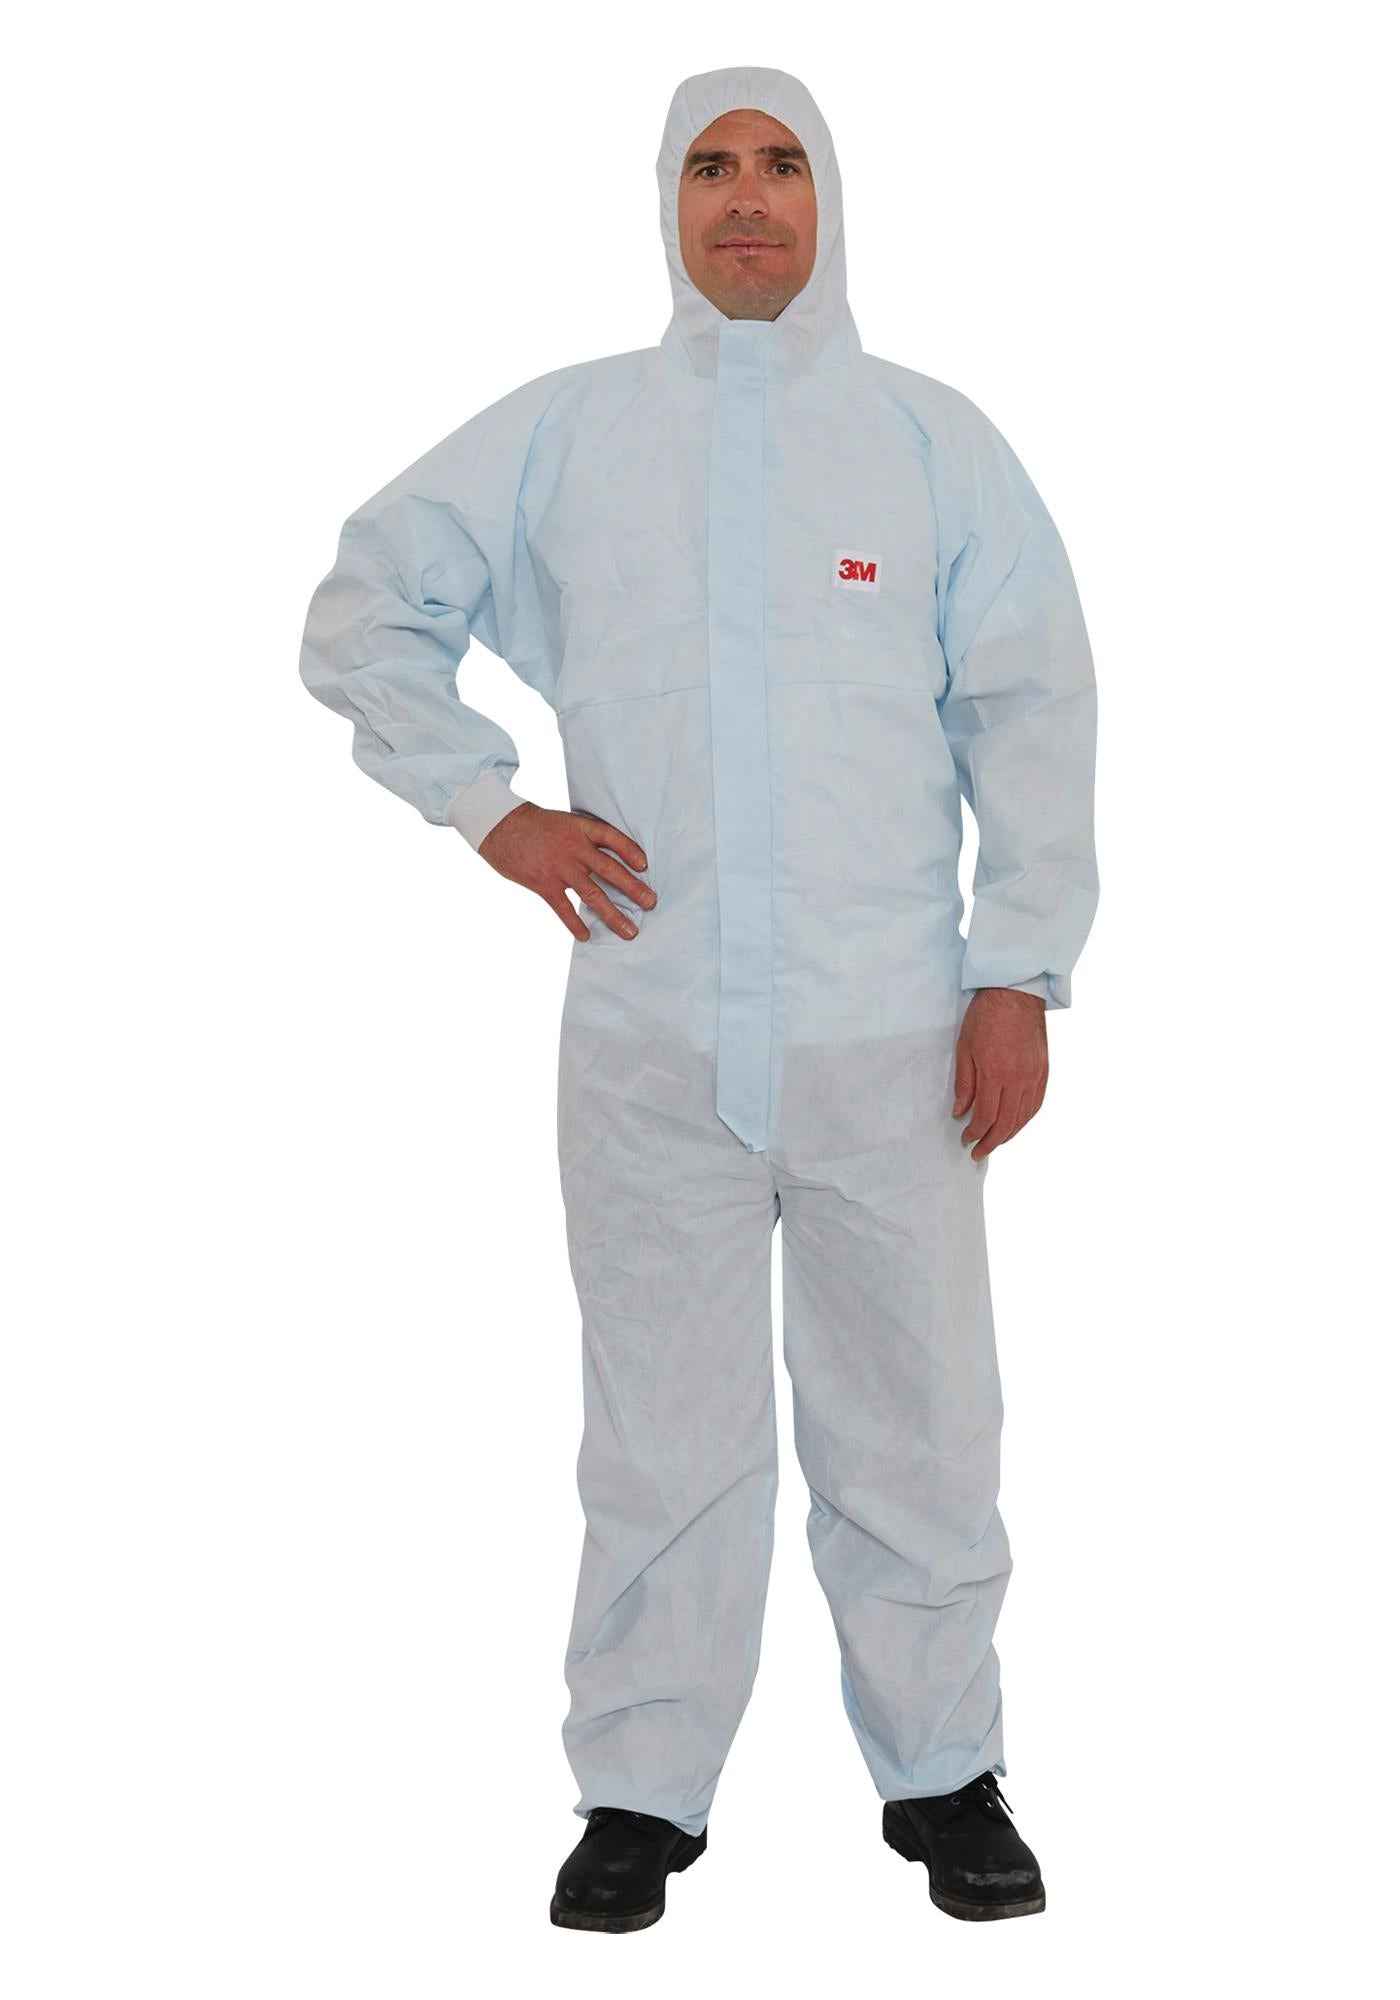 4532+W X LARGE PROTECTIVE COVERALL, X LARGE, BLU/WHT 3M